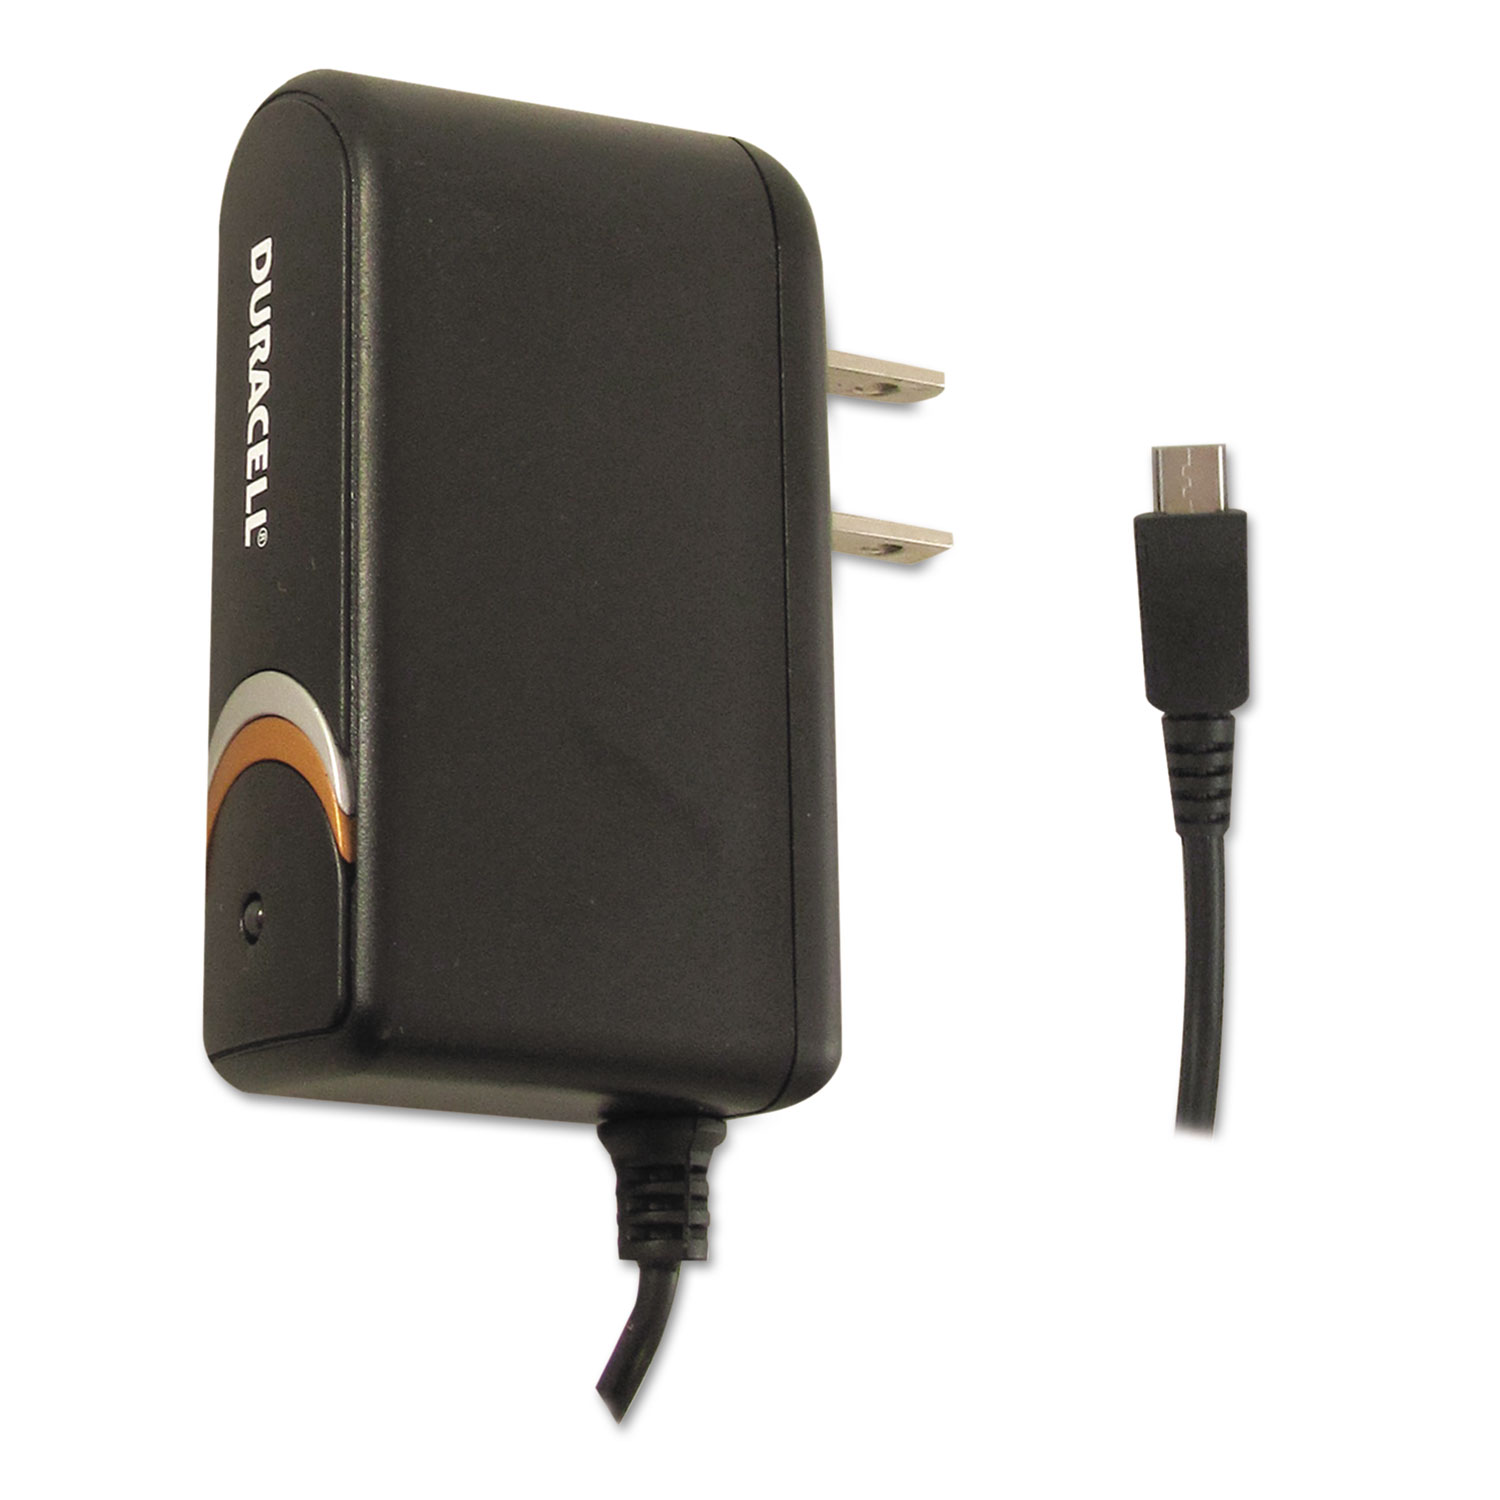 Wall Charger for Micro USB Devices